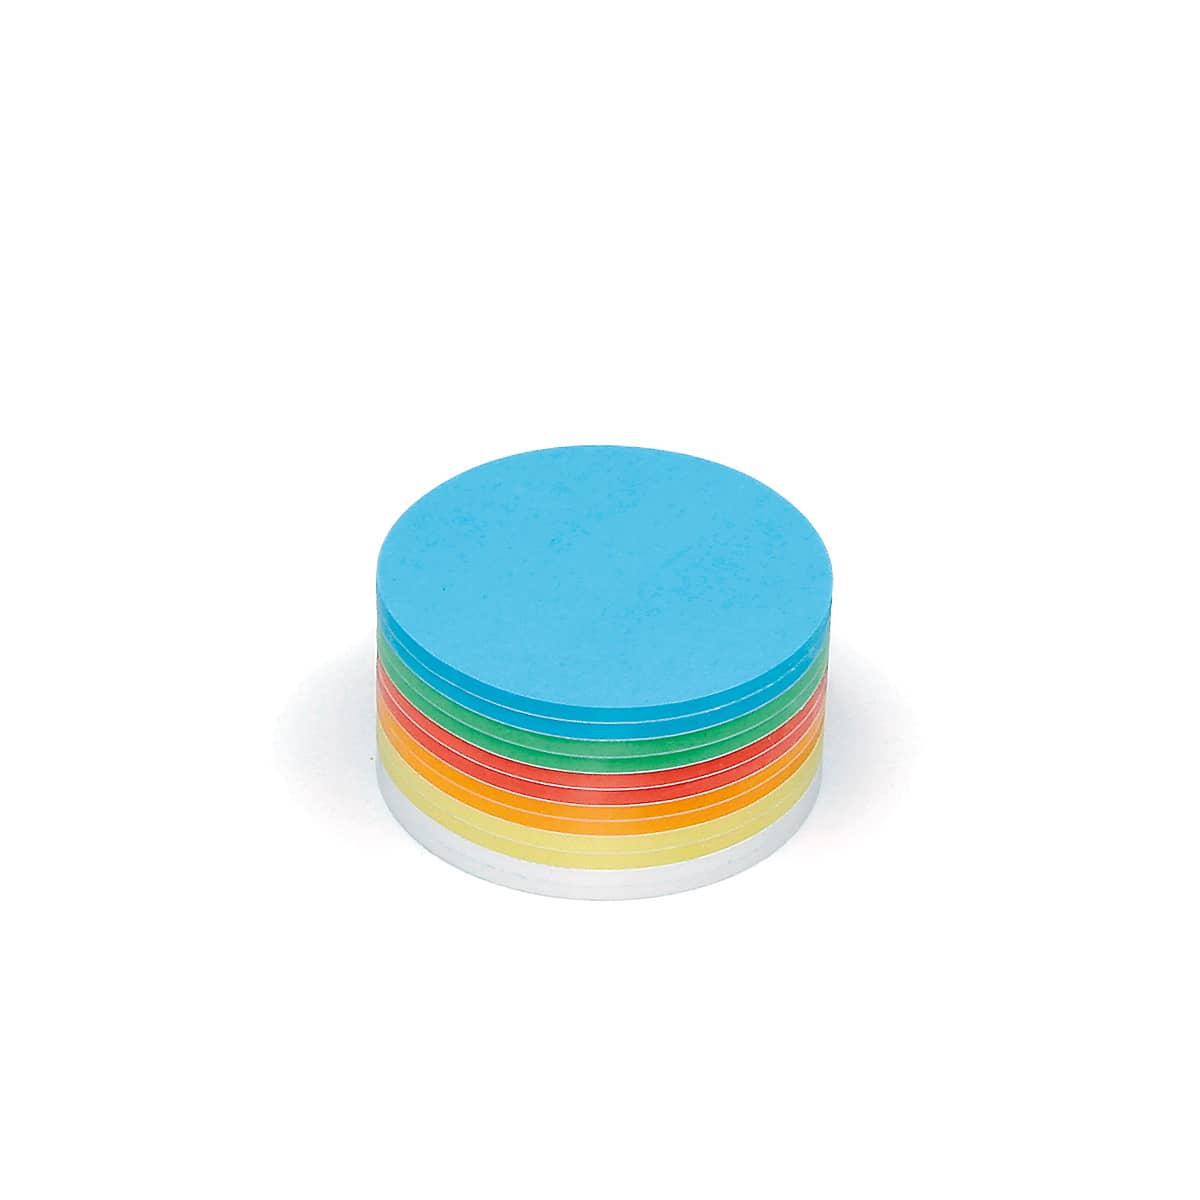 Stick-It Cards, small circular, 300 sheets, assorted